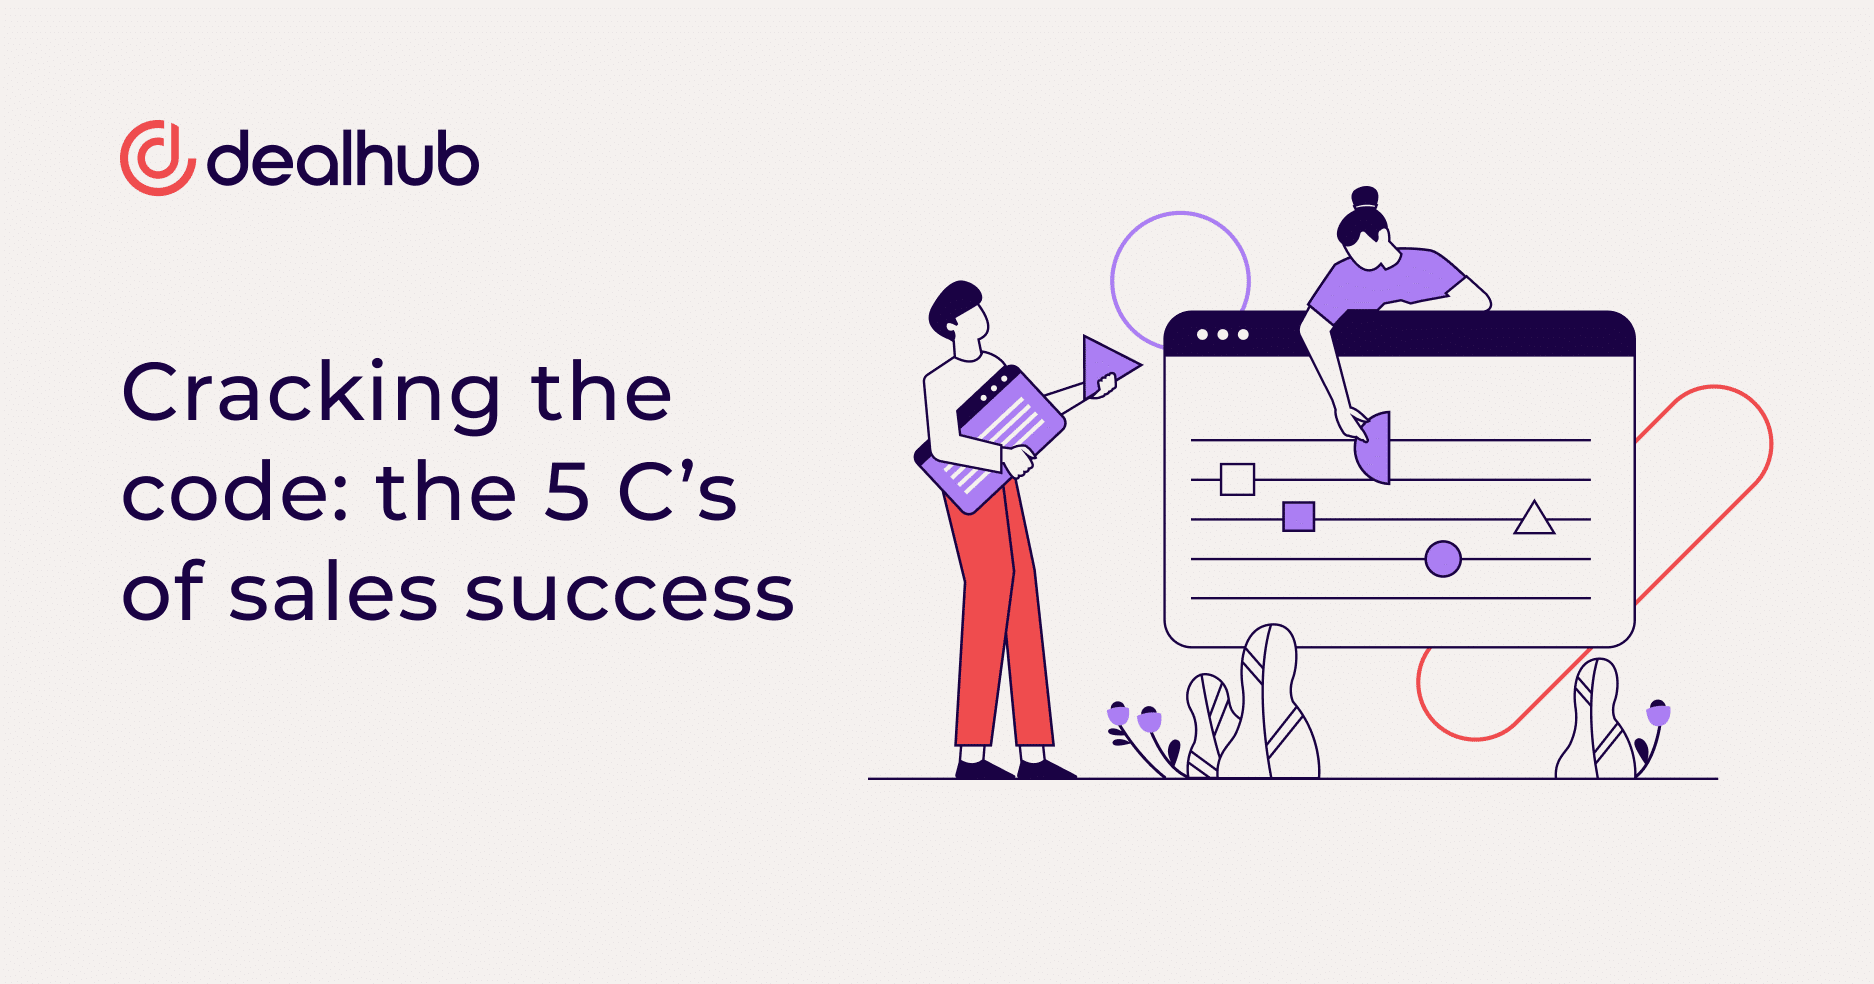 Cracking the code: the 5 Cs of sales success